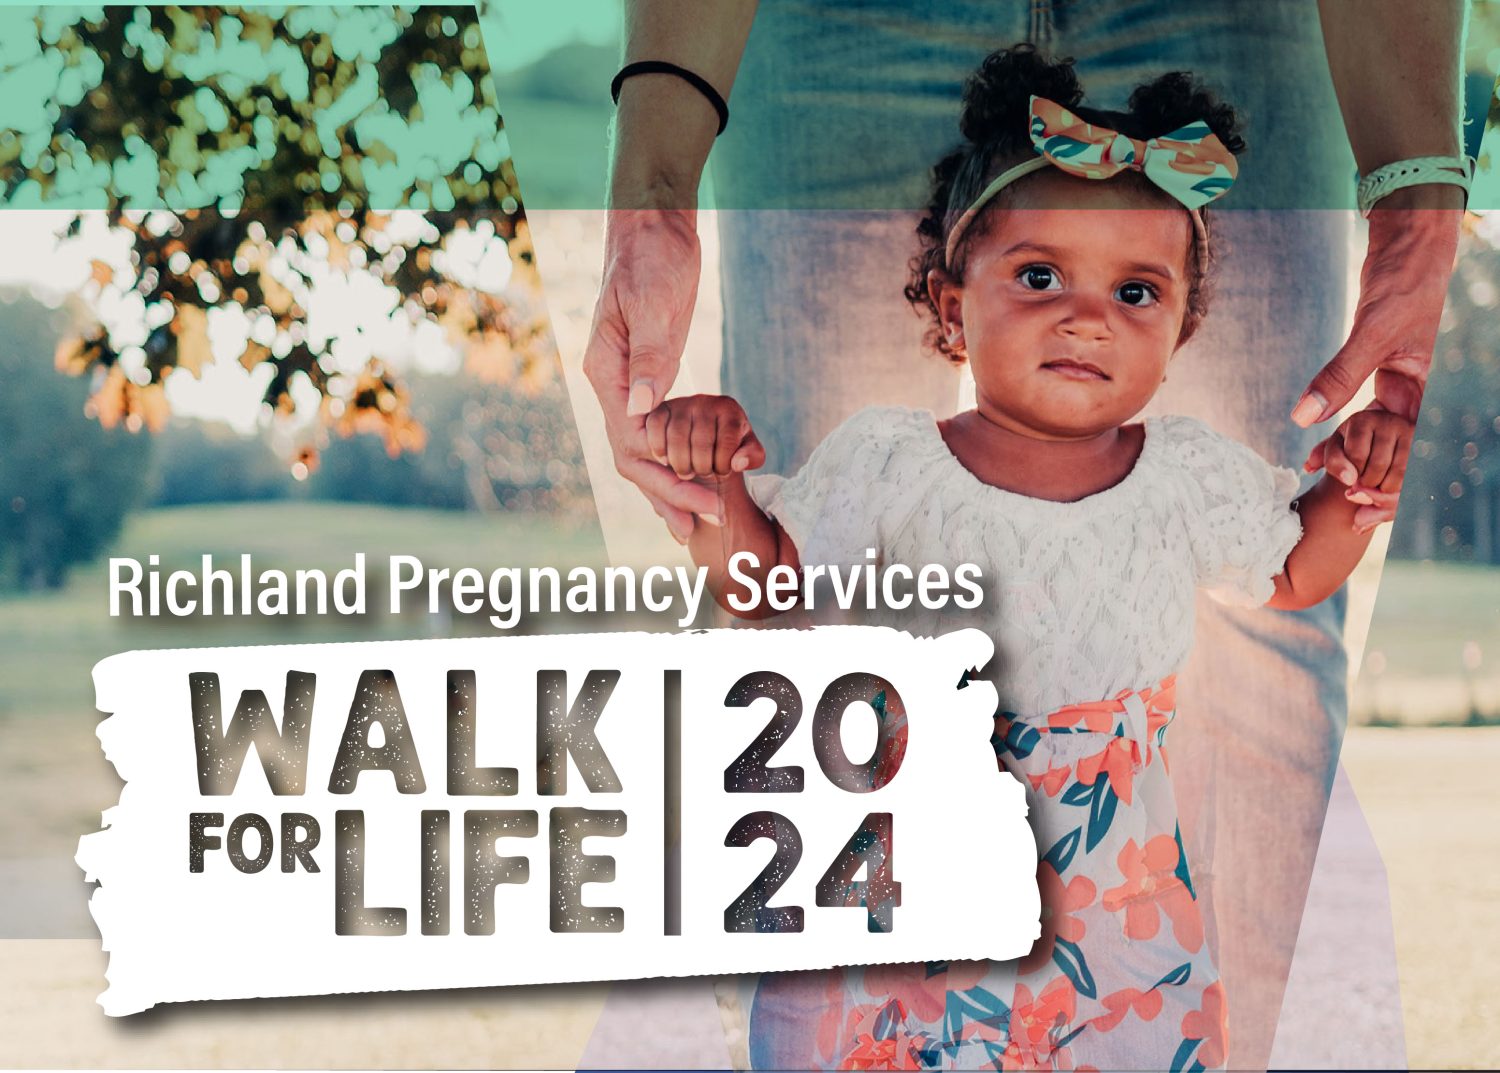 Walk for Life supporting Richland Pregnancy Services